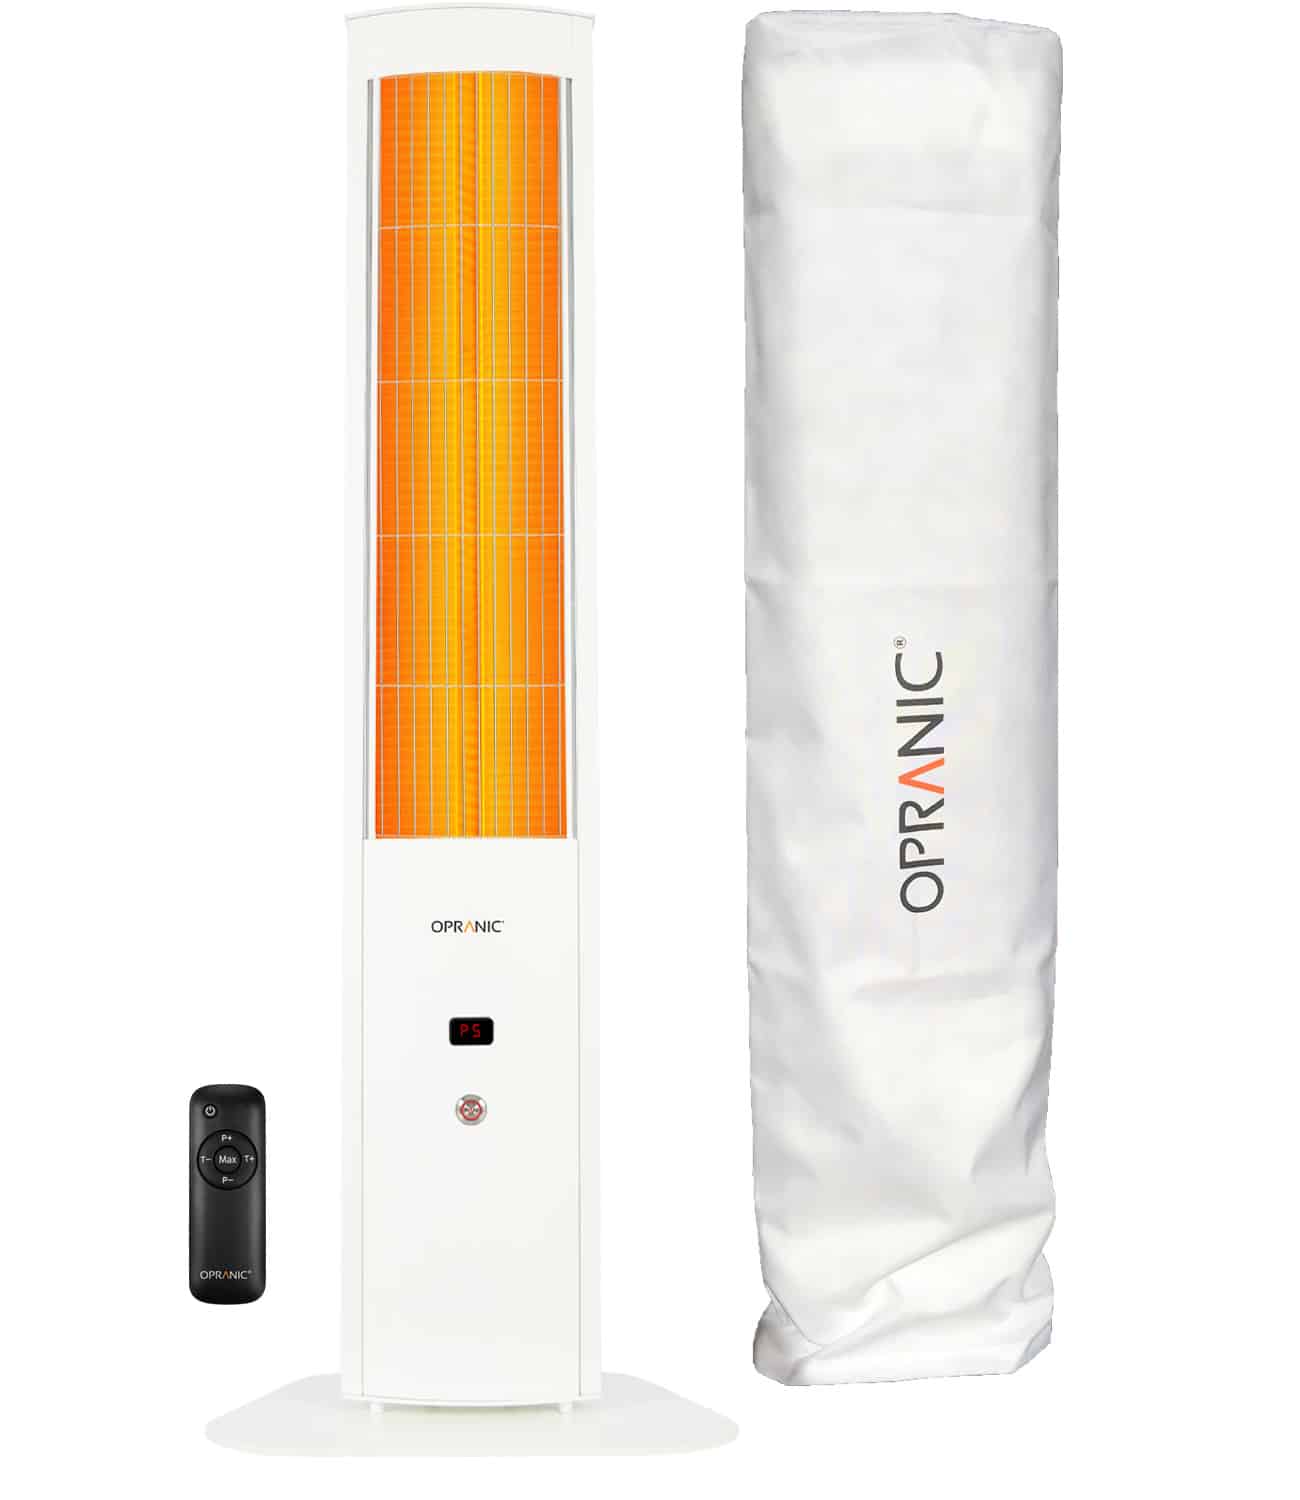 OPRANIC THOR S70R Portable Patio Heater 2300W, IR-X Carbon Black, IP65, Remote, Timer, Cloud White, Cover